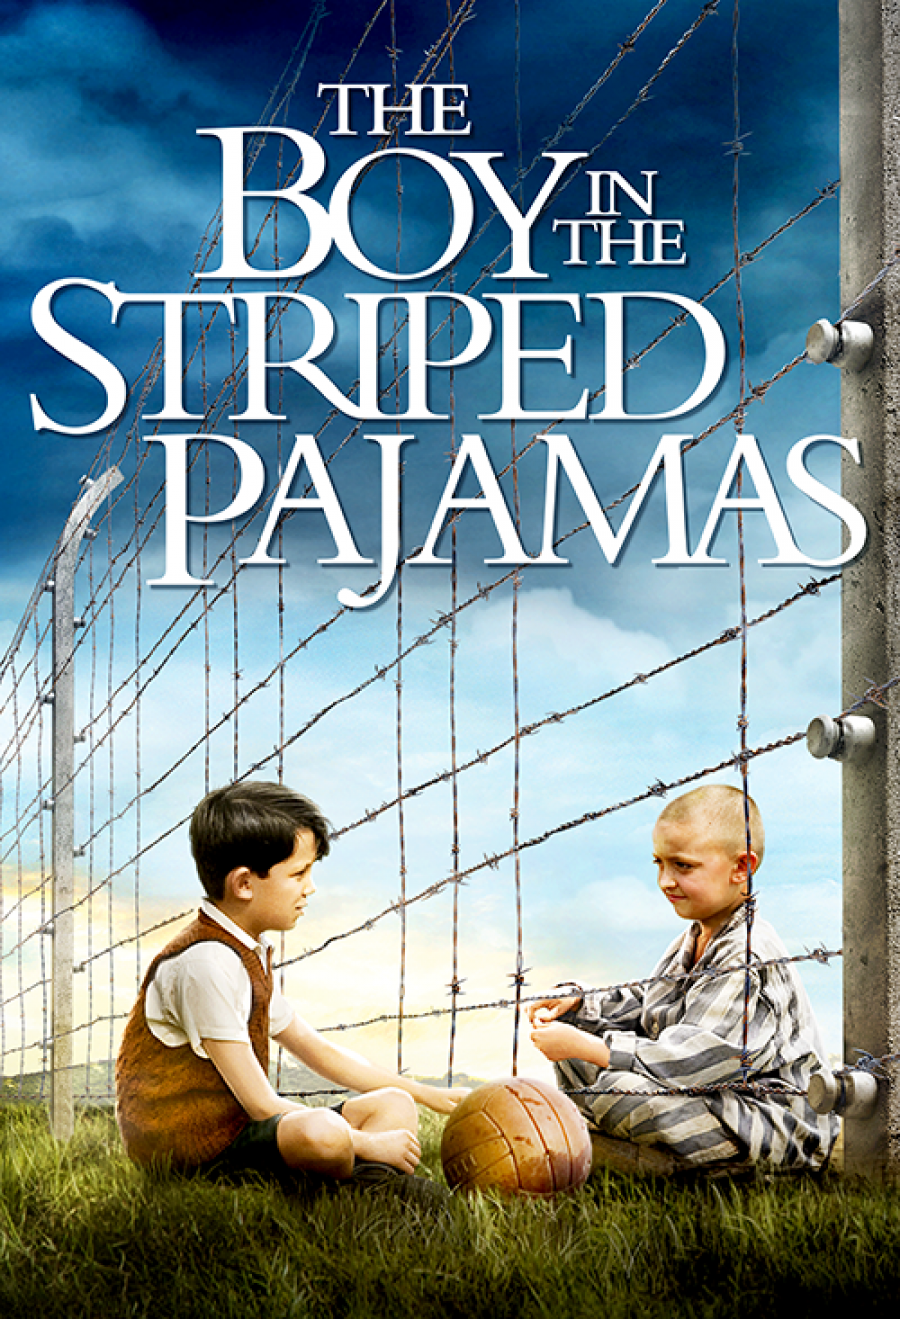 Innocence in a world of ignorance. The boy in the striped pajamas